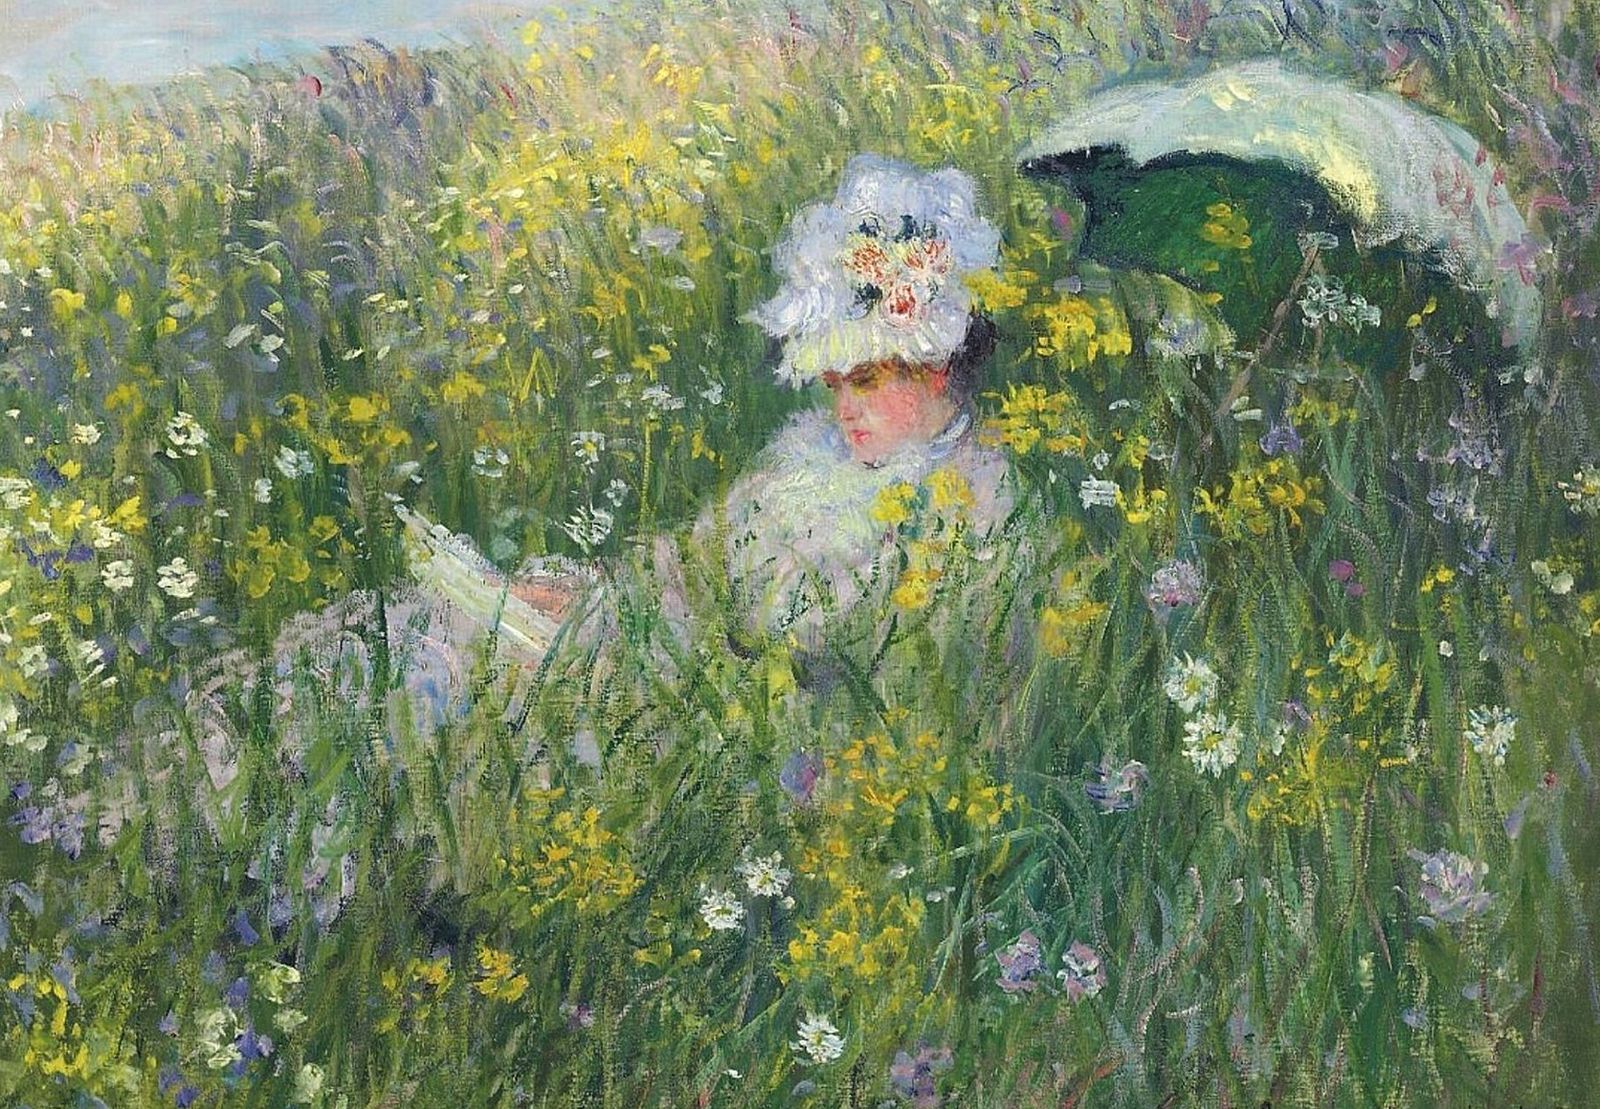 http://impressionism.su/monet/picture/In%20the%20Meadow.jpg